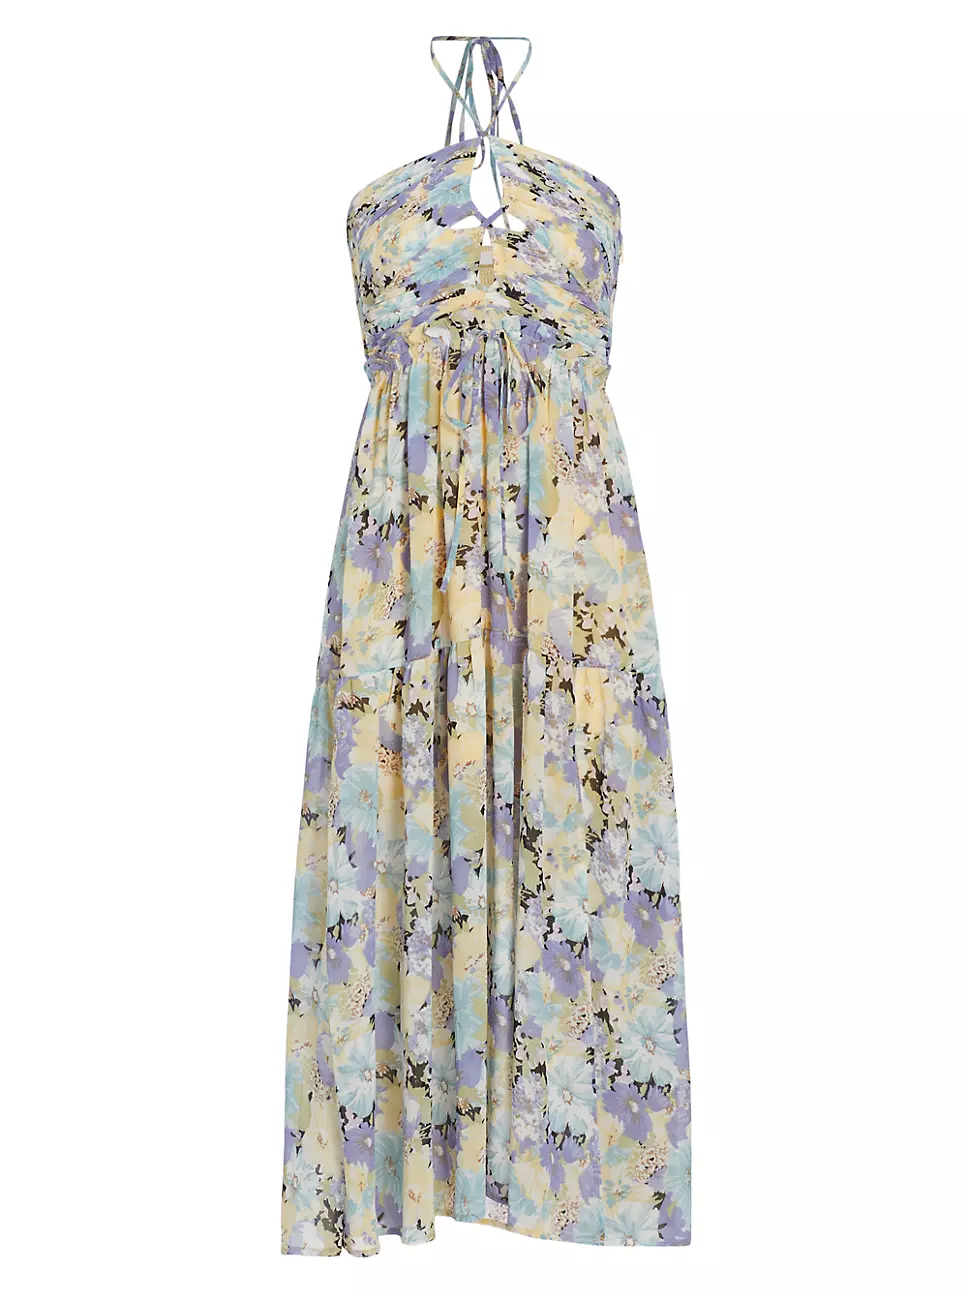 Guide to the perfect floral summer midi dresses to elevate your style this season. From elegant garden parties to casual sunny days, find your ideal match for comfort, style, and versatility. Summer Dress | Sundress | Cute Dress | Beach Dress | Sun Dress | Midi Dress | Flower Dress | Spring Fling Dress | Floral Summer Midi Dresses | Floral Summer Midi Dress | Floral Midi Dress | Floral Midi Dresses | Floral Midi Dress Outfit | Floral Midi Dresses Casual | Floral Midi Dress Outfit Summer